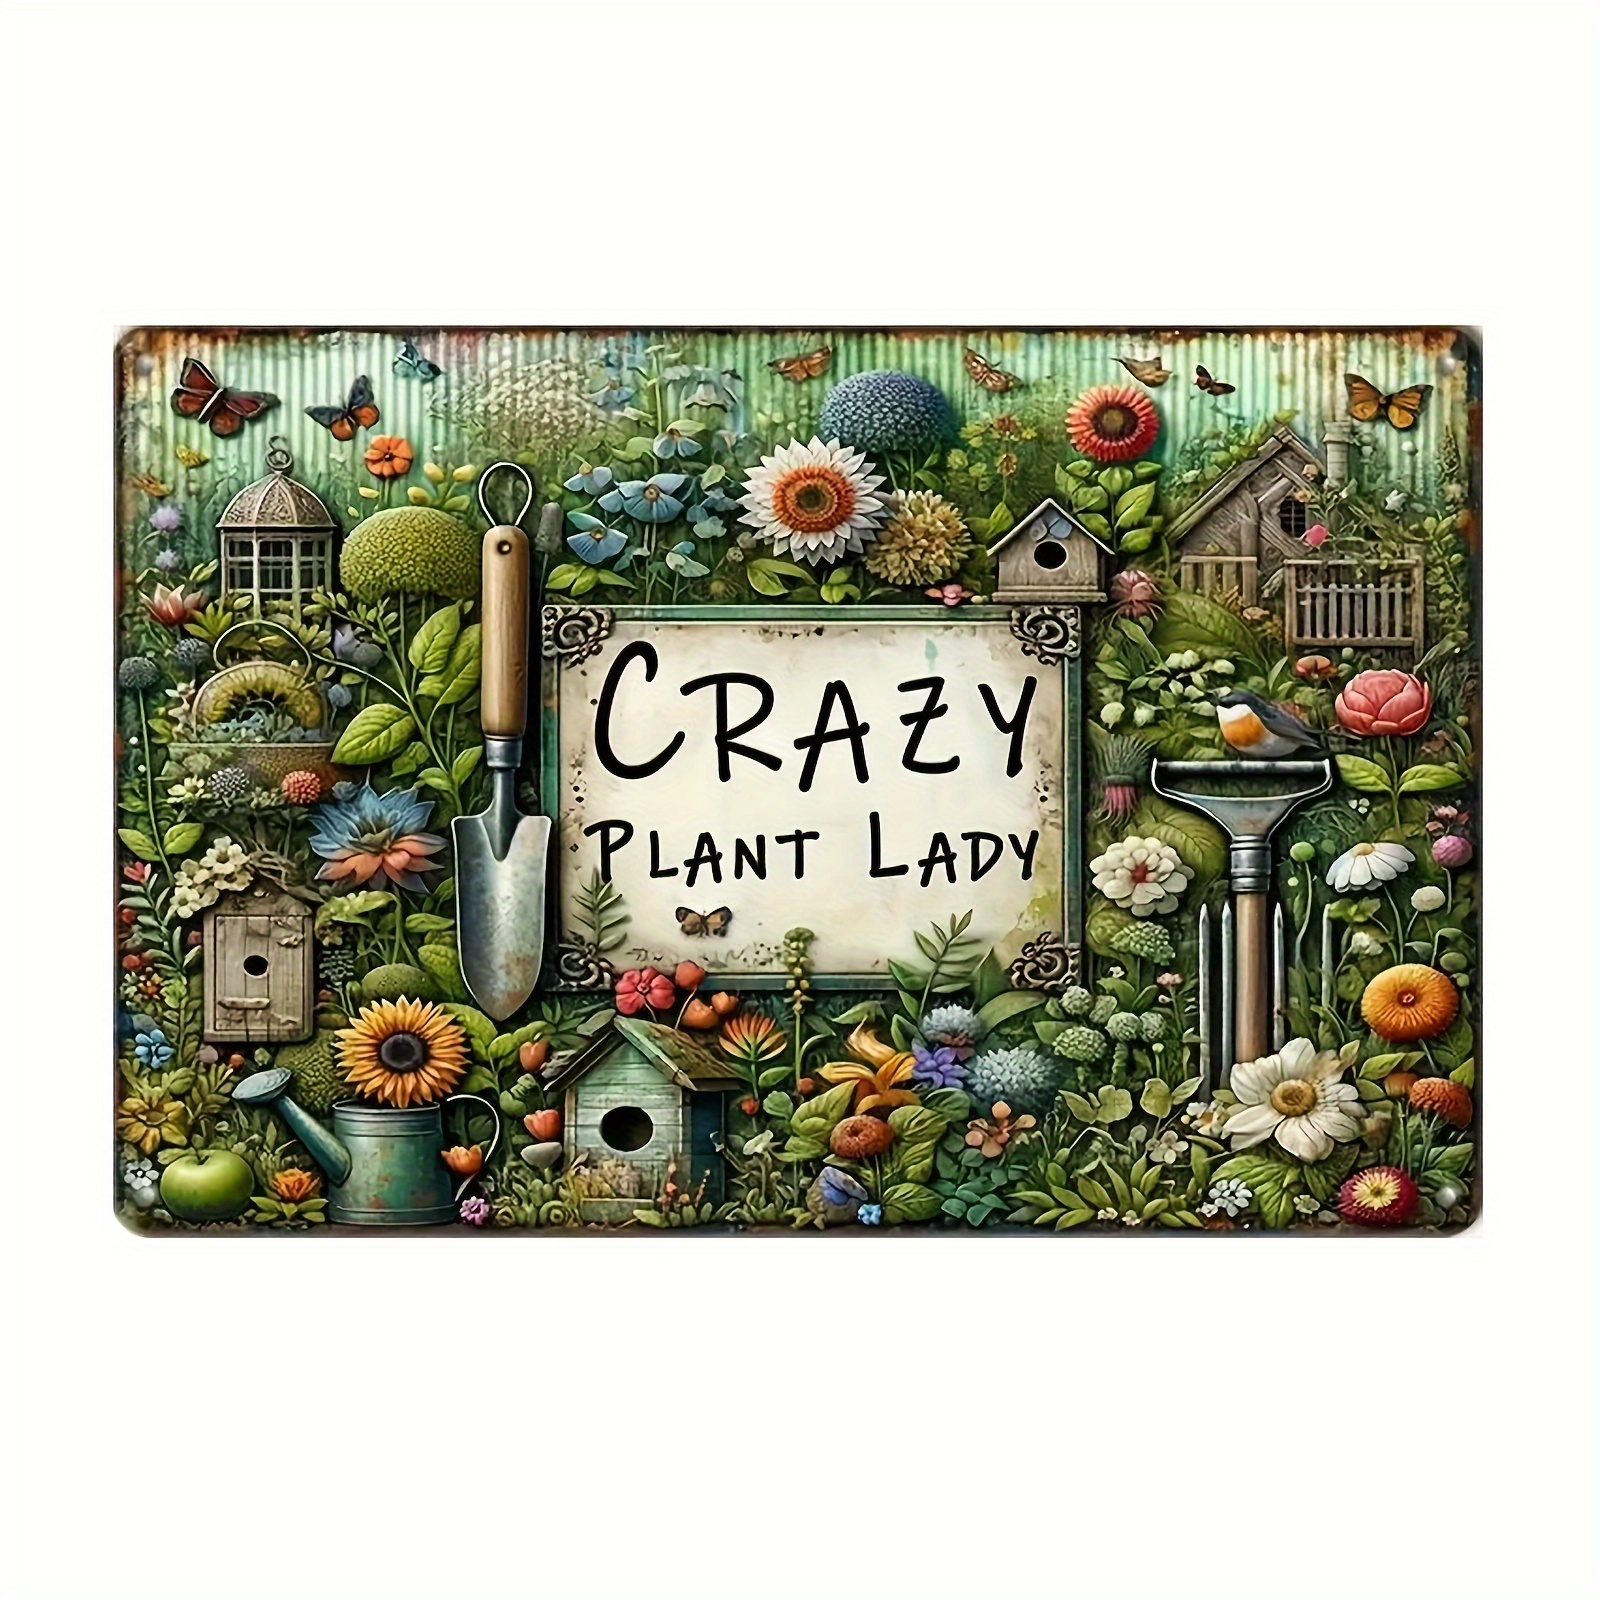 

Vintage-inspired 'crazy Plant Lady' Metal Sign - 8x12" Wall Art For Home & Garden Decor